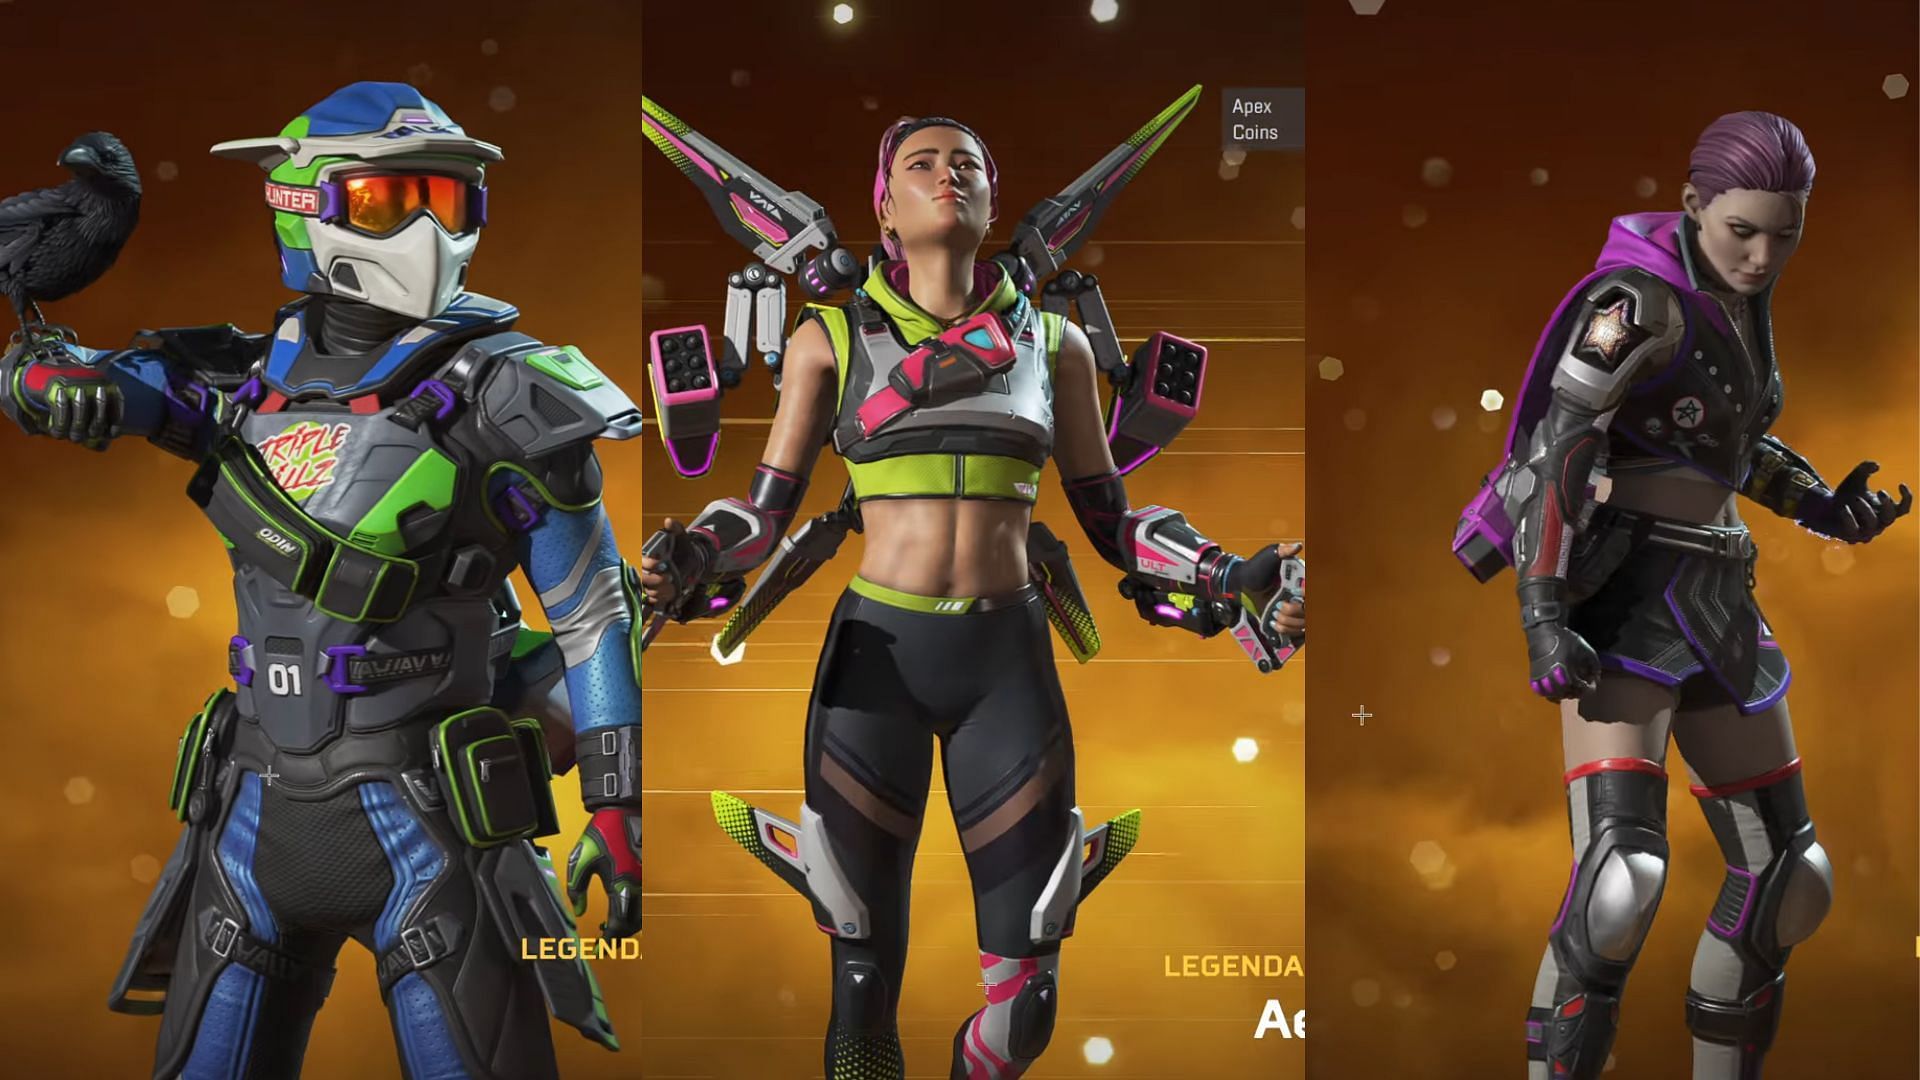 The Galactic Sports Store shop event is live in Apex Legends, Galactic Sports Store shop event in Apex Legends